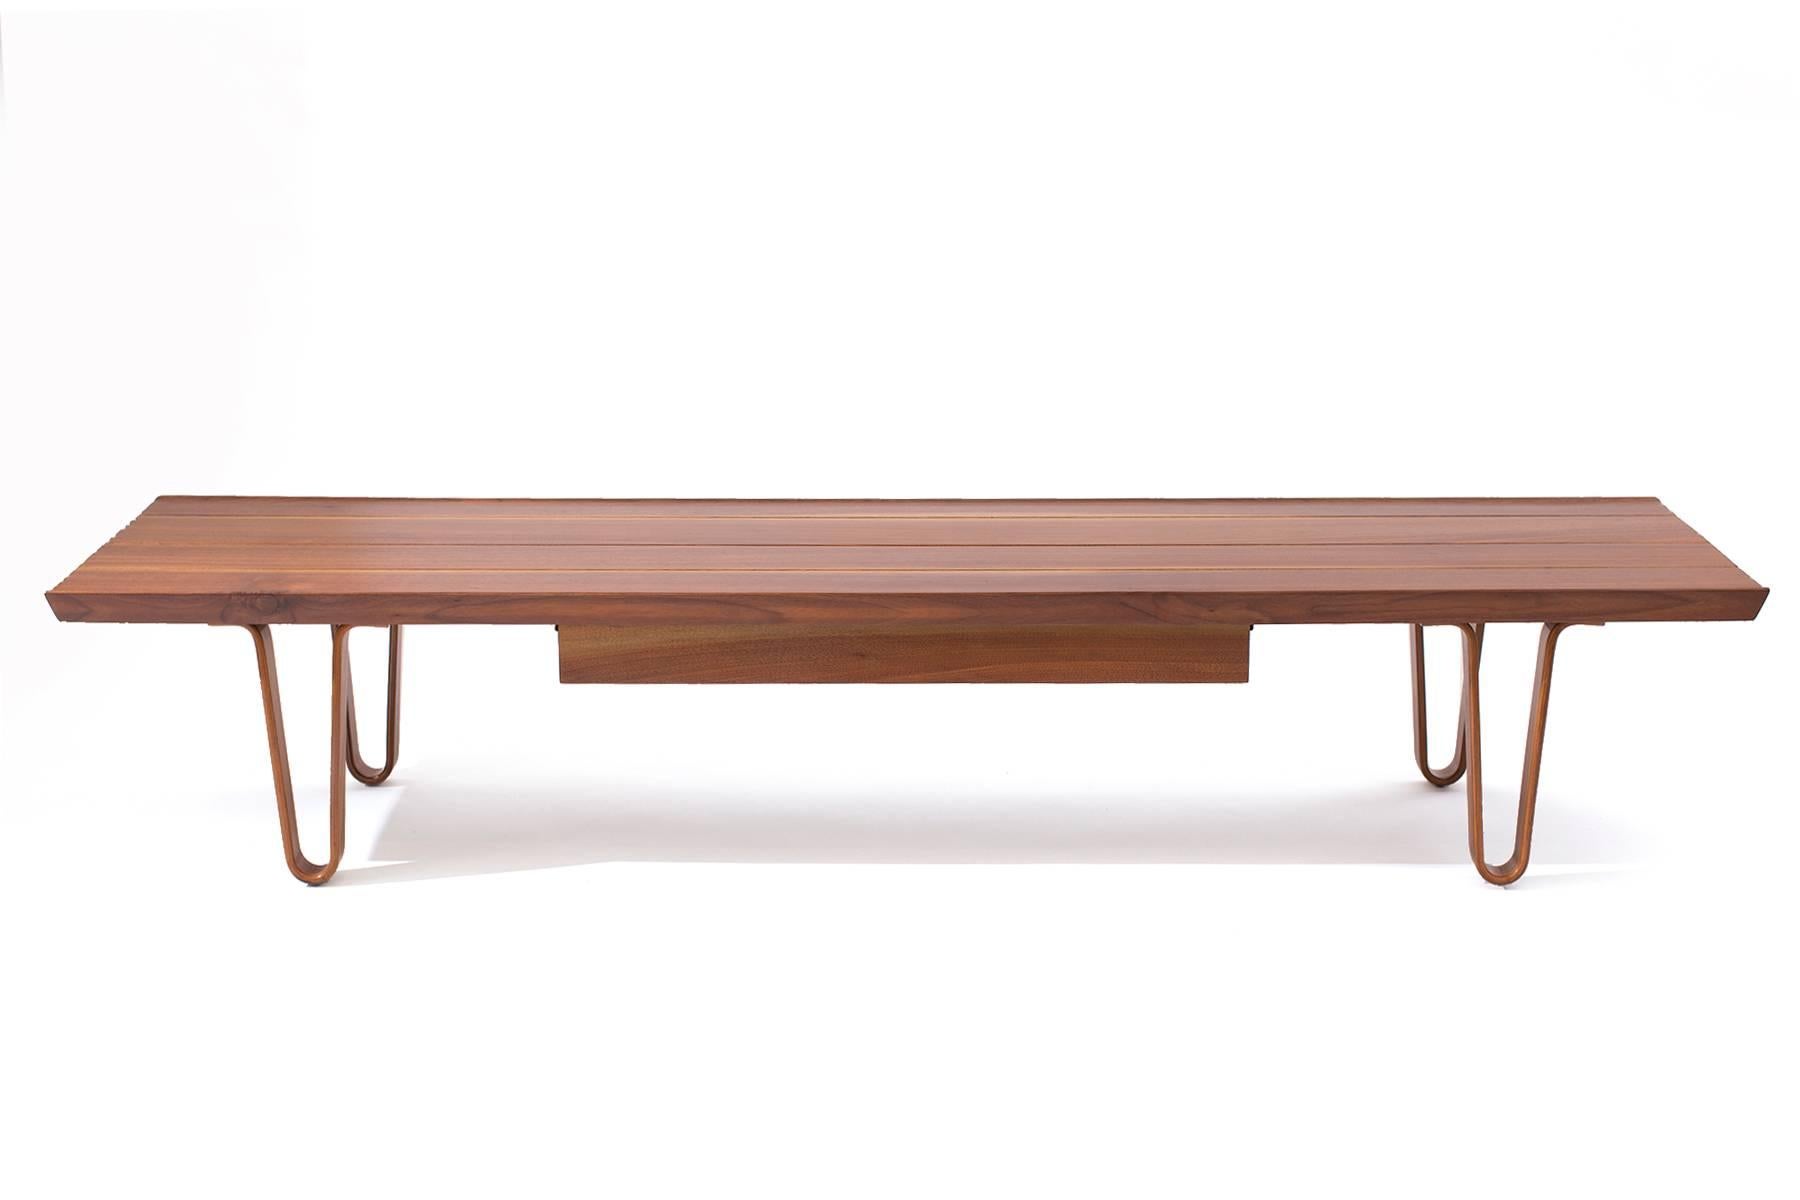 Edward Wormley for Dunbar long john bench with drawer, circa early 1950s. This example's top has solid walnut slats with beautiful sap grain. The legs are subtly curved laminated walnut. It has been recently impeccably refinished.